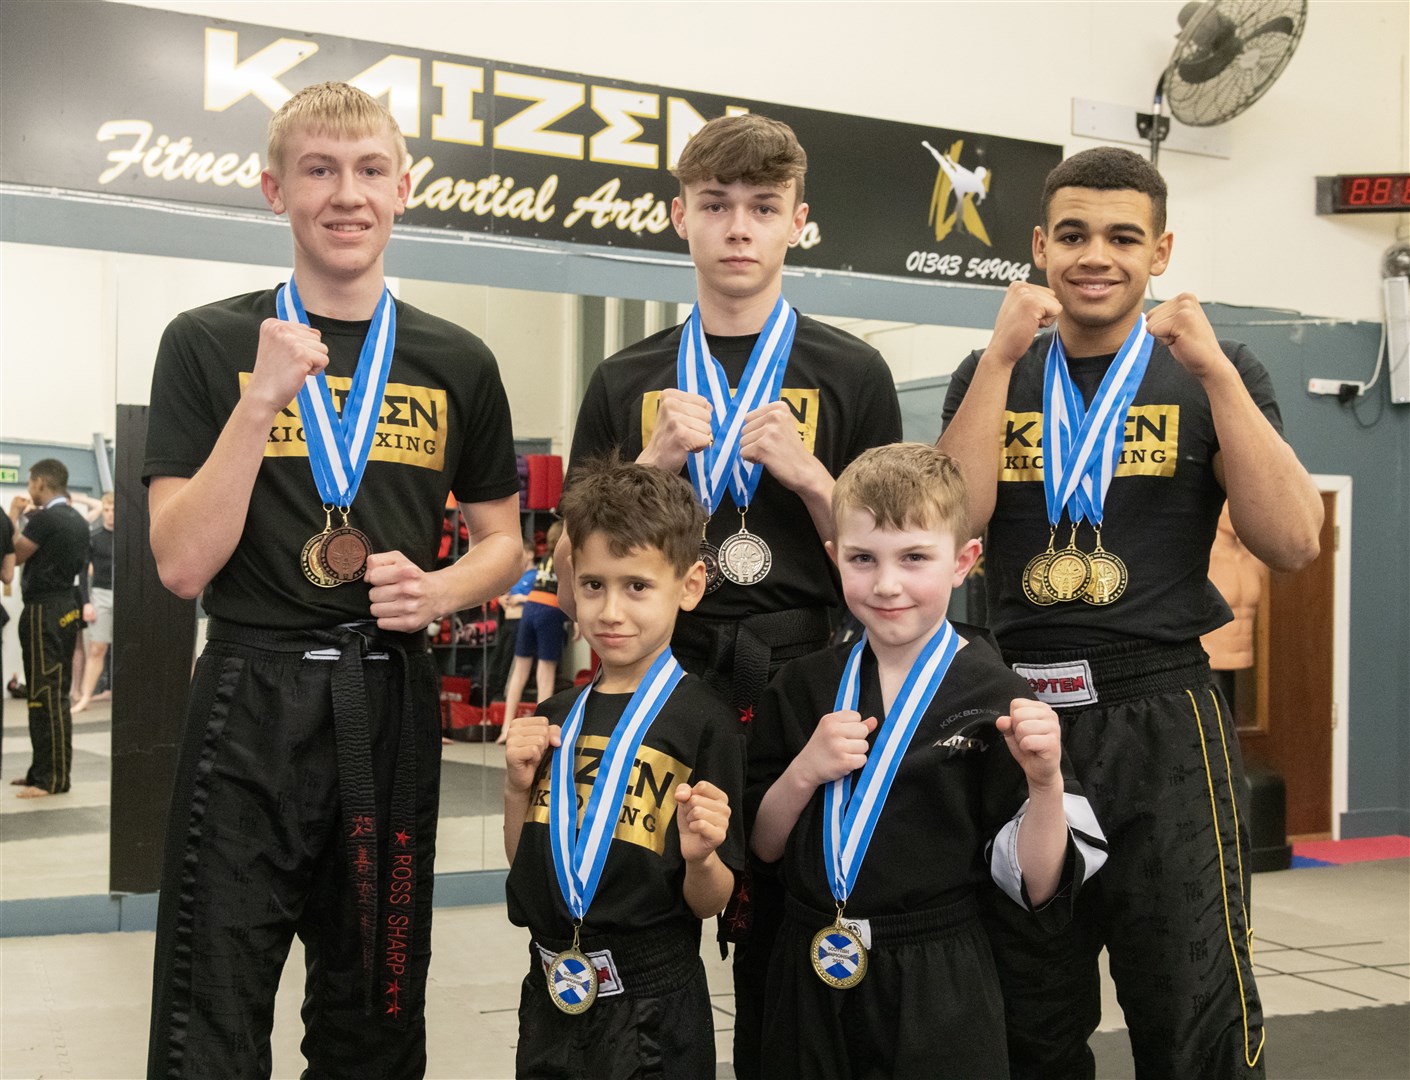 From left: Ross Sharp, Isaac Hussian, Logan Souter, Ross McGregor and Ethan Hendry from Kaizen Kickboxing have won medals at their recent competition in Paisley...Pictures: Beth Taylor.